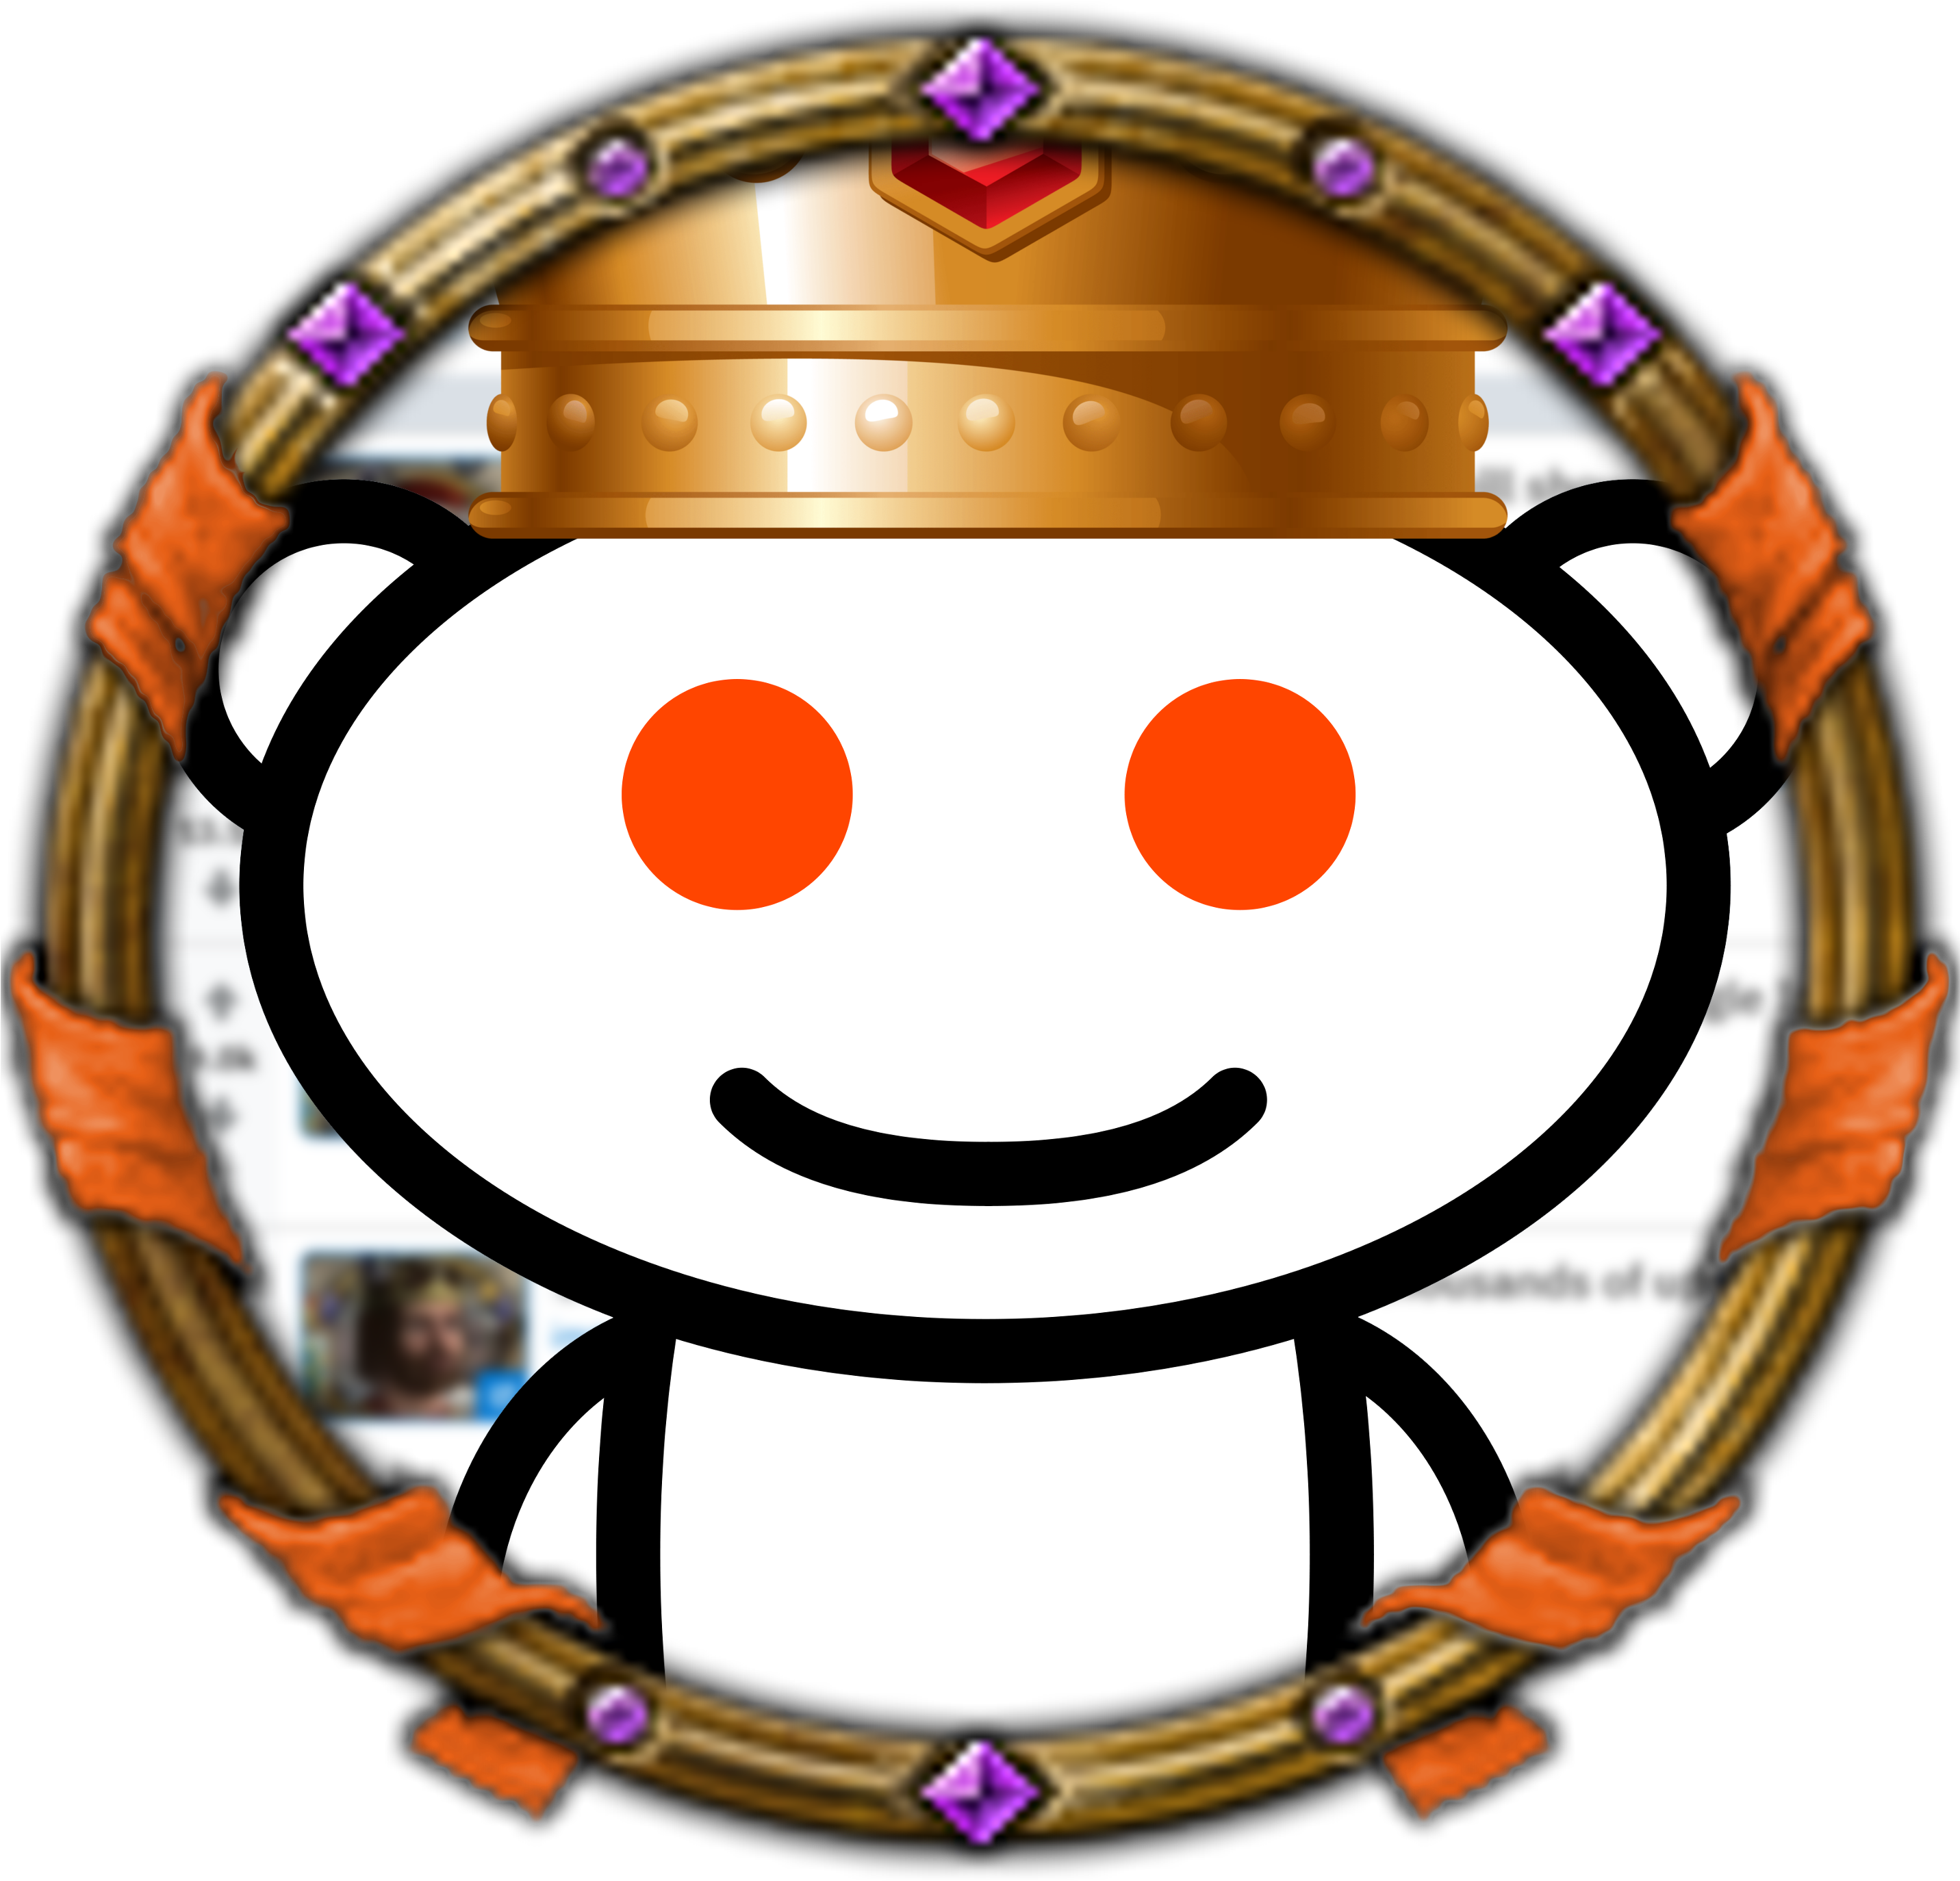 A Nice Snoo I Made For The Crusader Kings Reddit In - A Nice Snoo I Made For The Crusader Kings Reddit In (2862x2862)